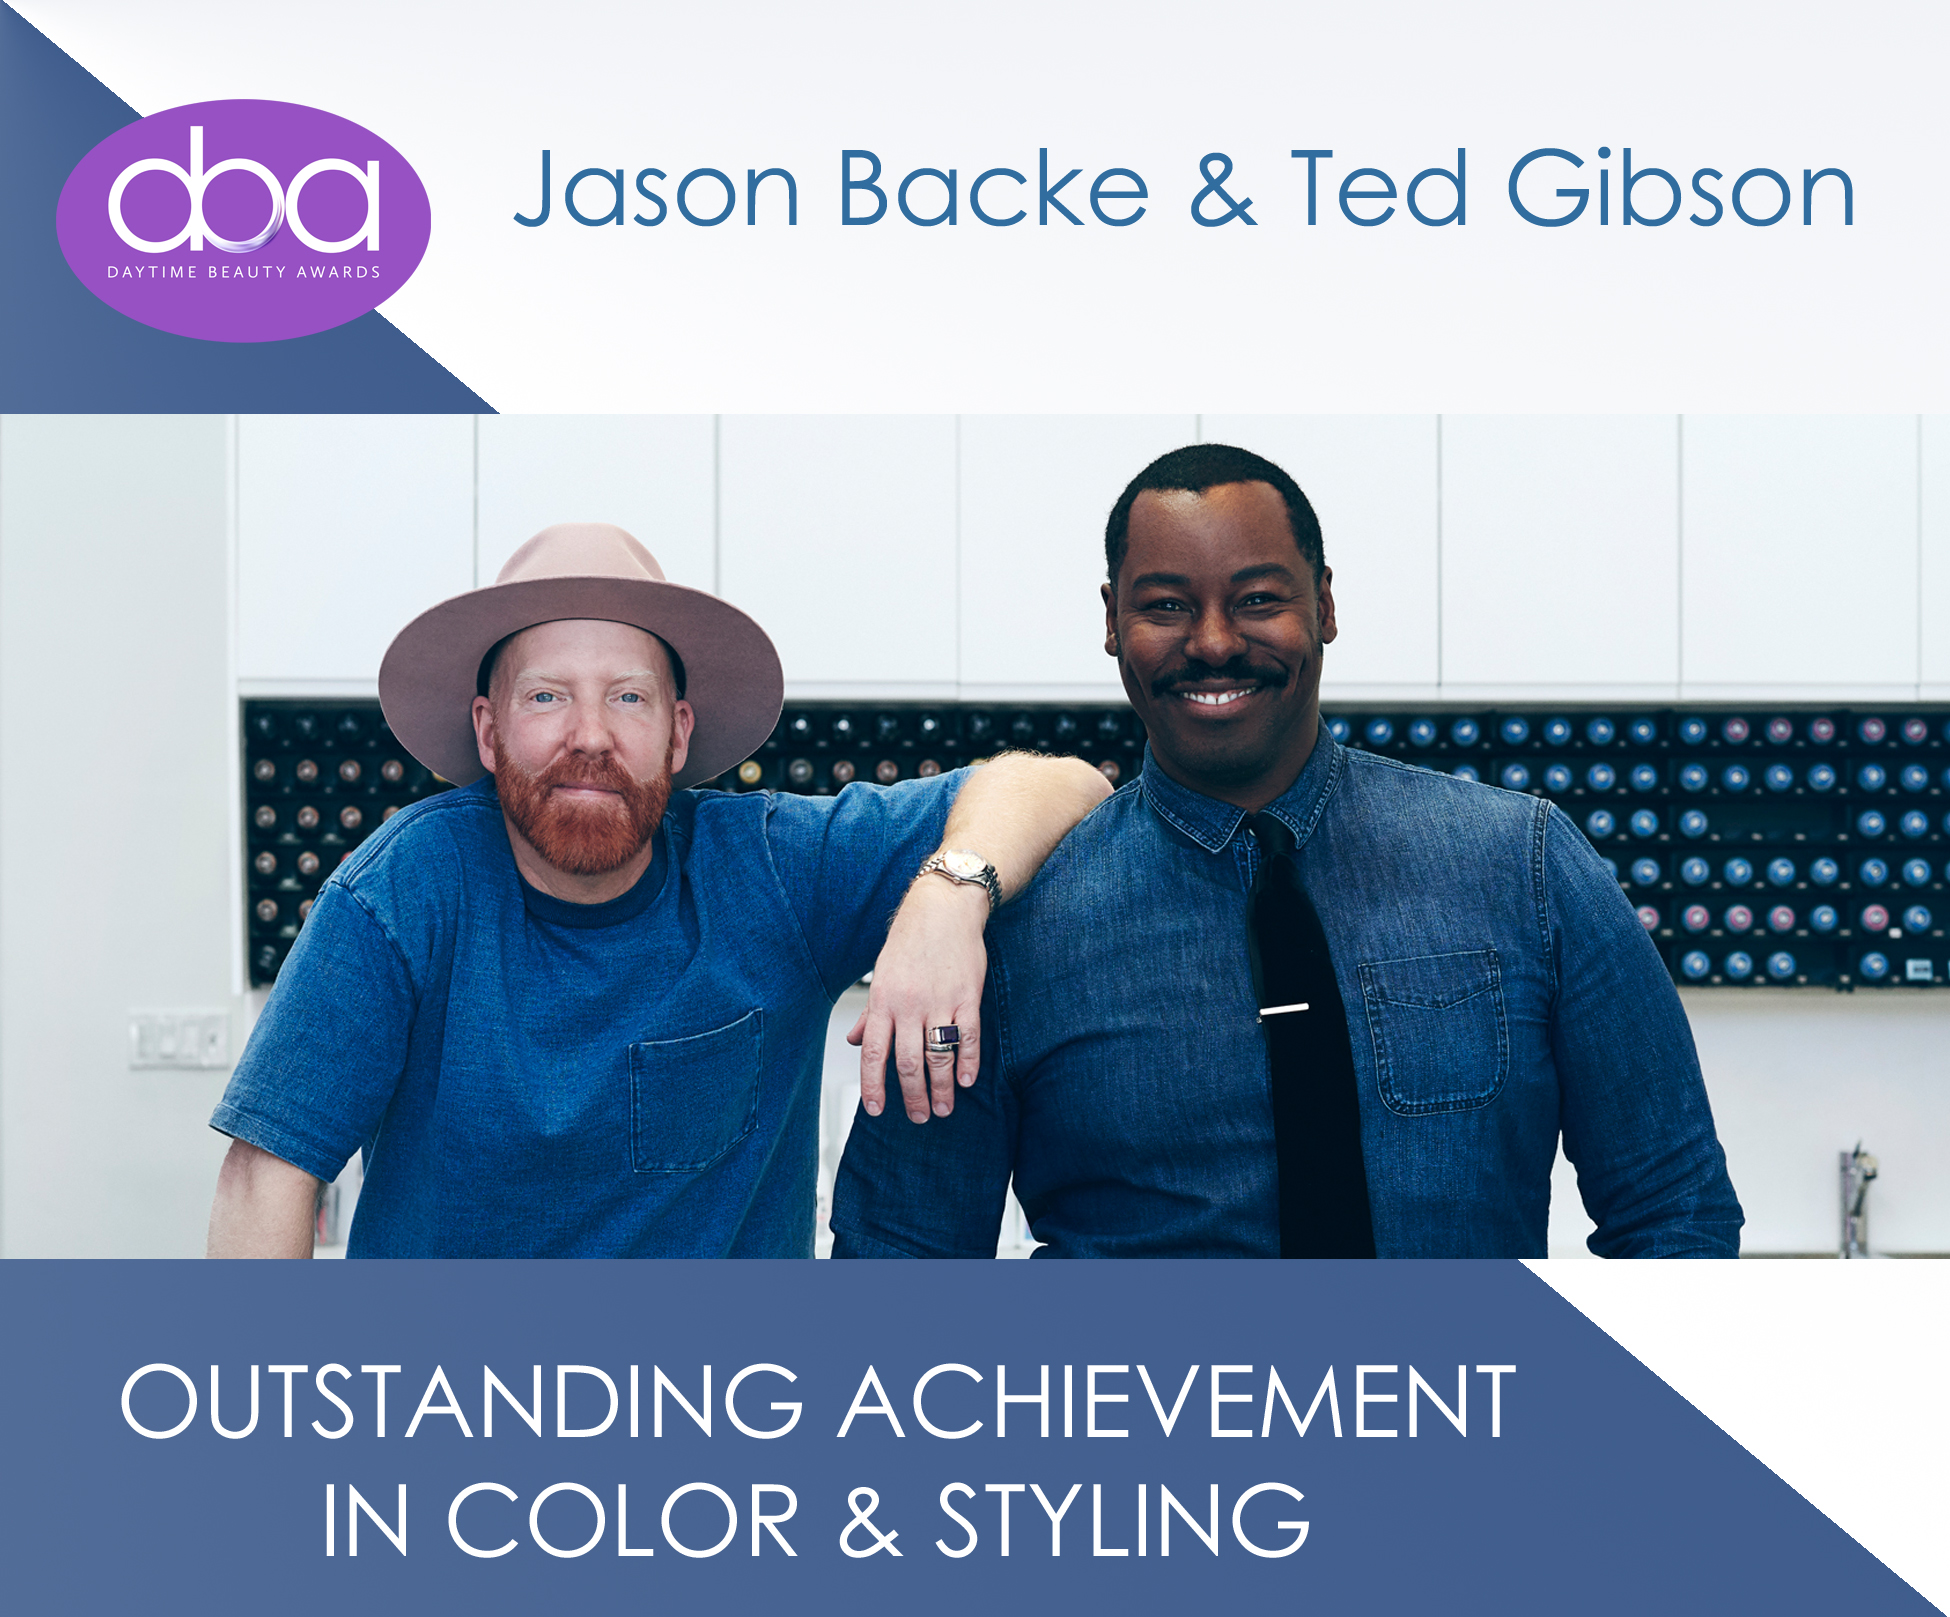 ted gibson, jason backe, starring, daytime beauty awards, color, styling